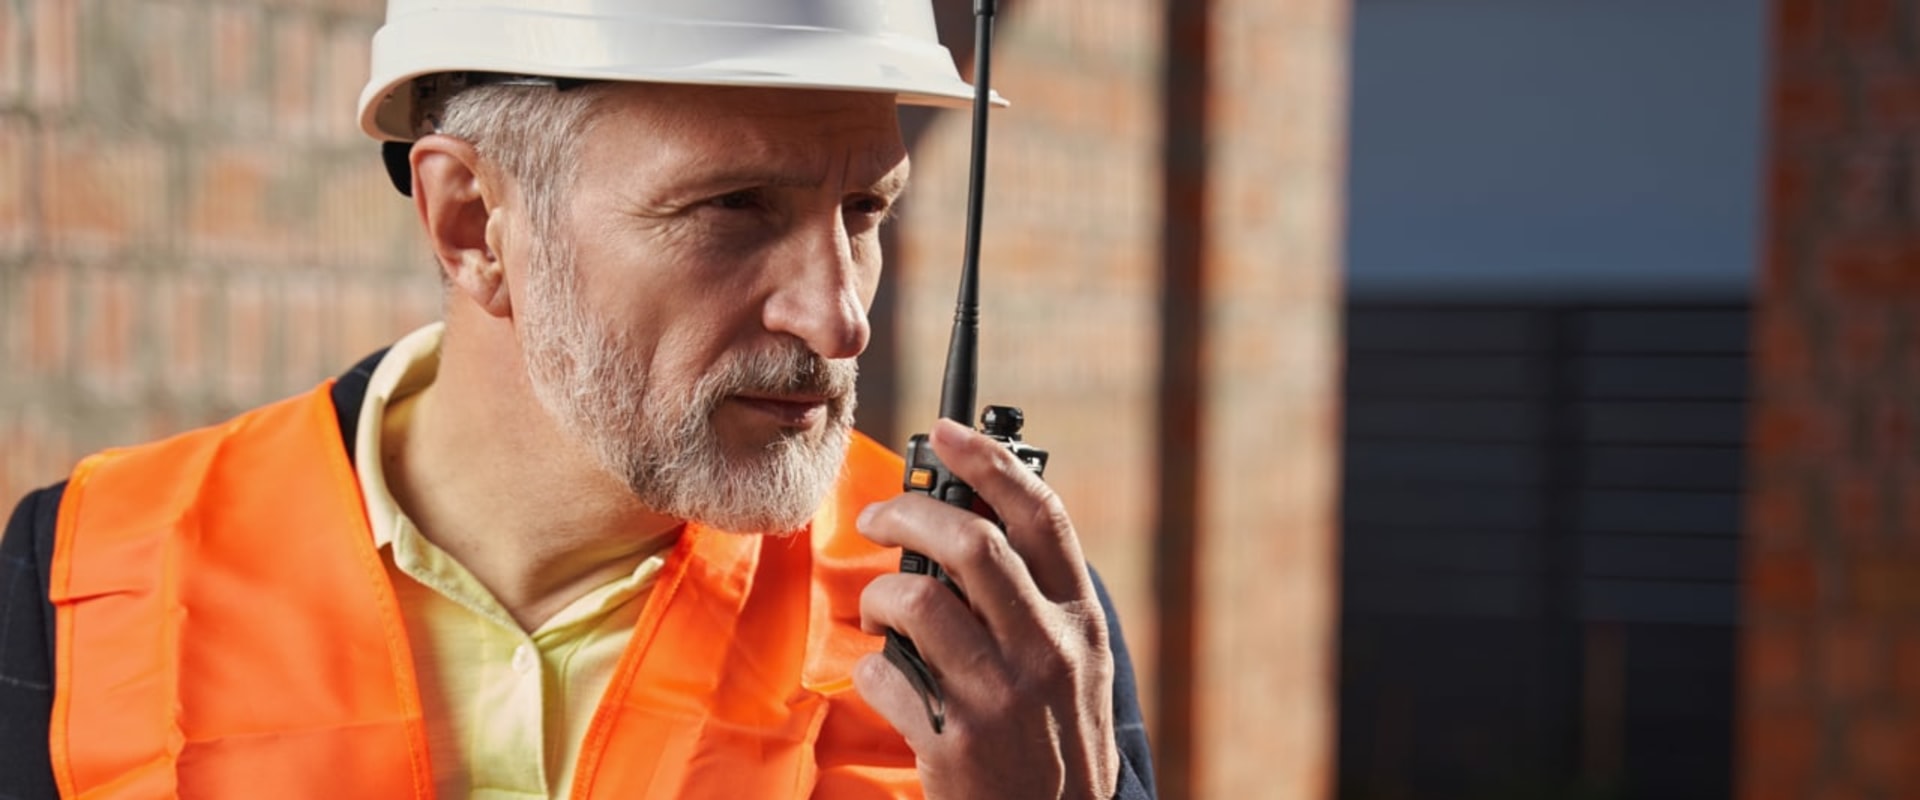 Avoiding Contractor Scams: Expert Tips to Protect Yourself